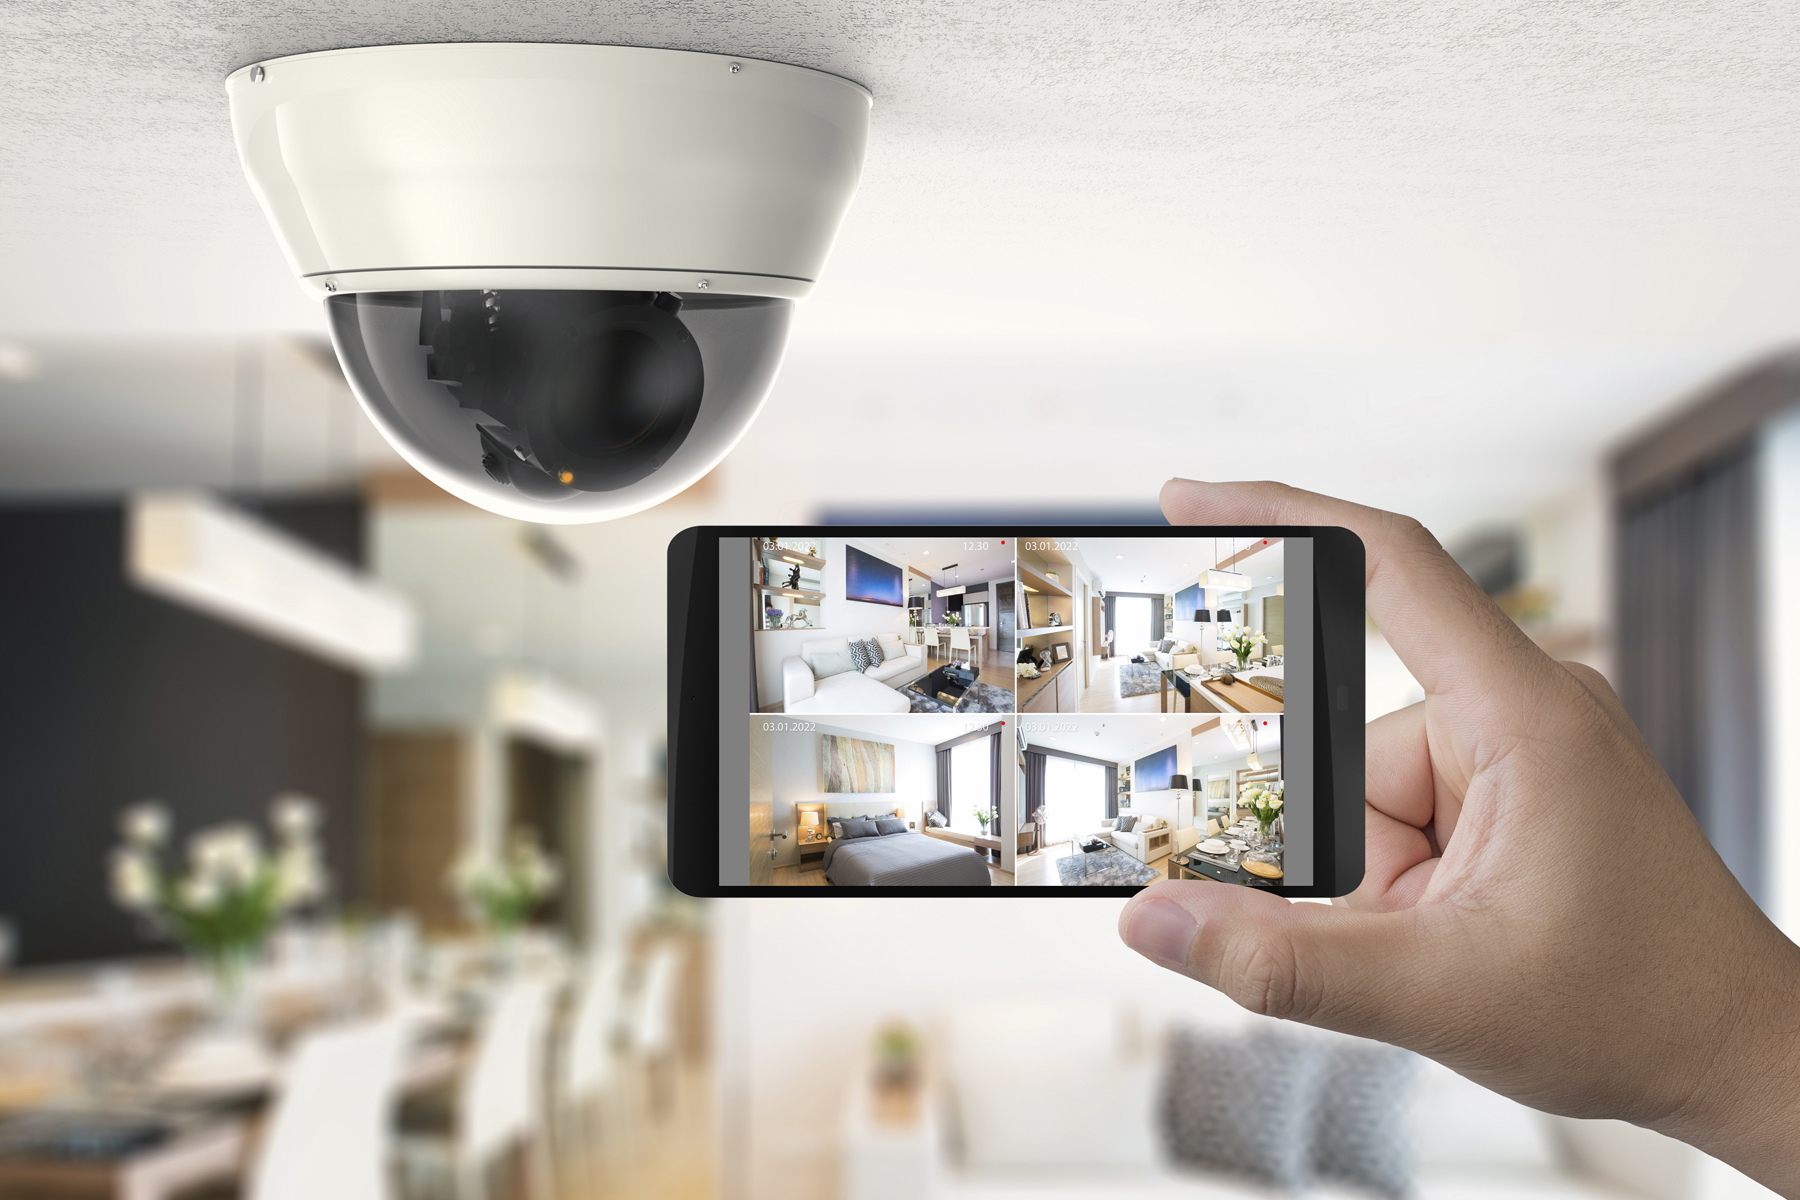 Modern security cameras linked to mobile phone app